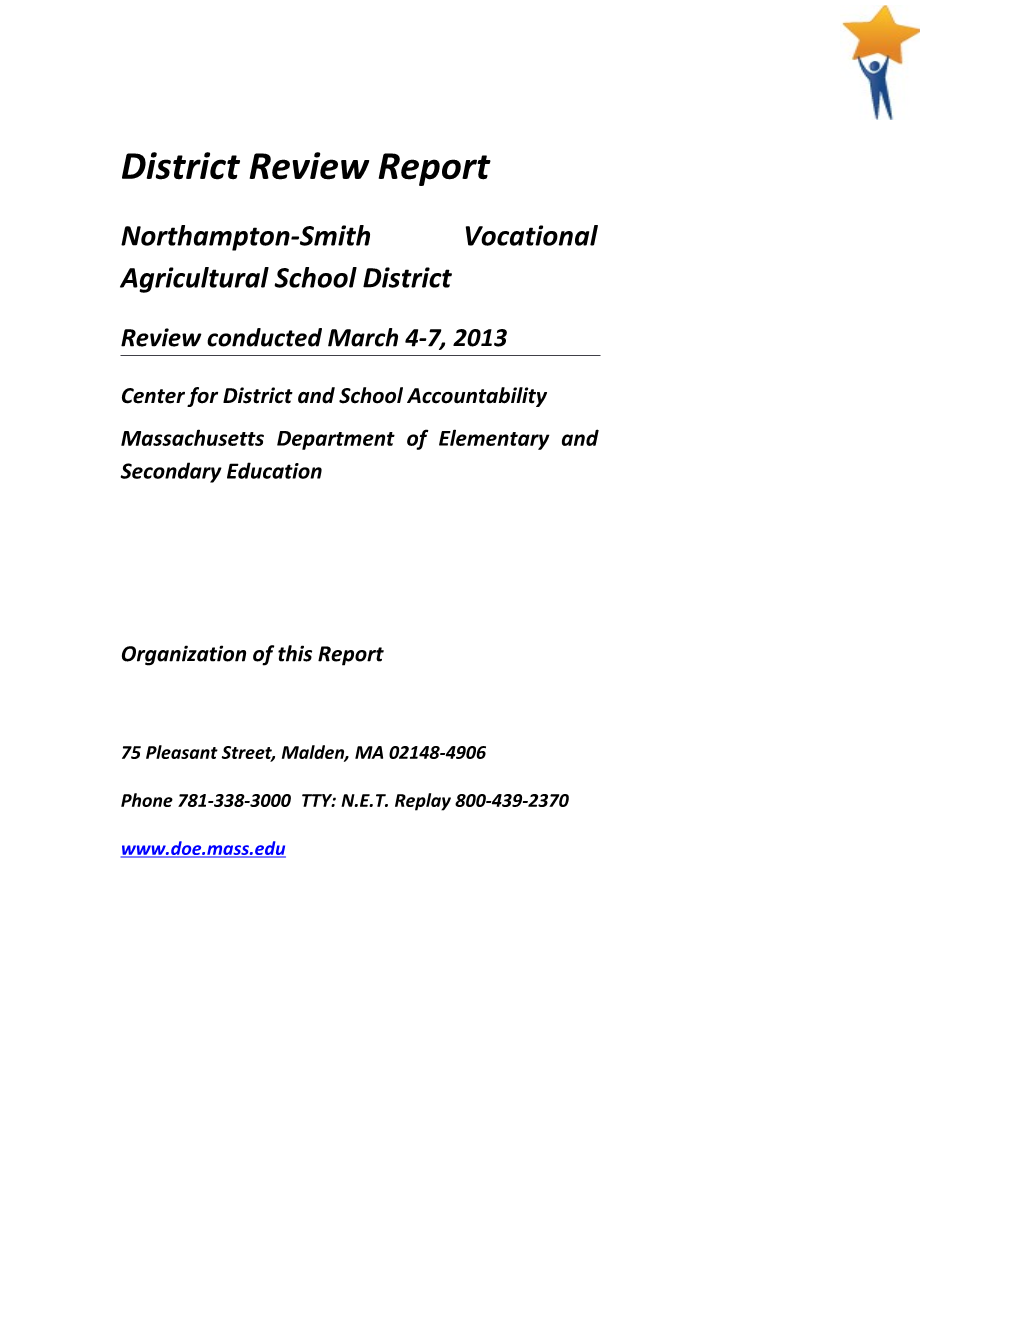 Northampton-Smith District Review Report, 2013 Onsite